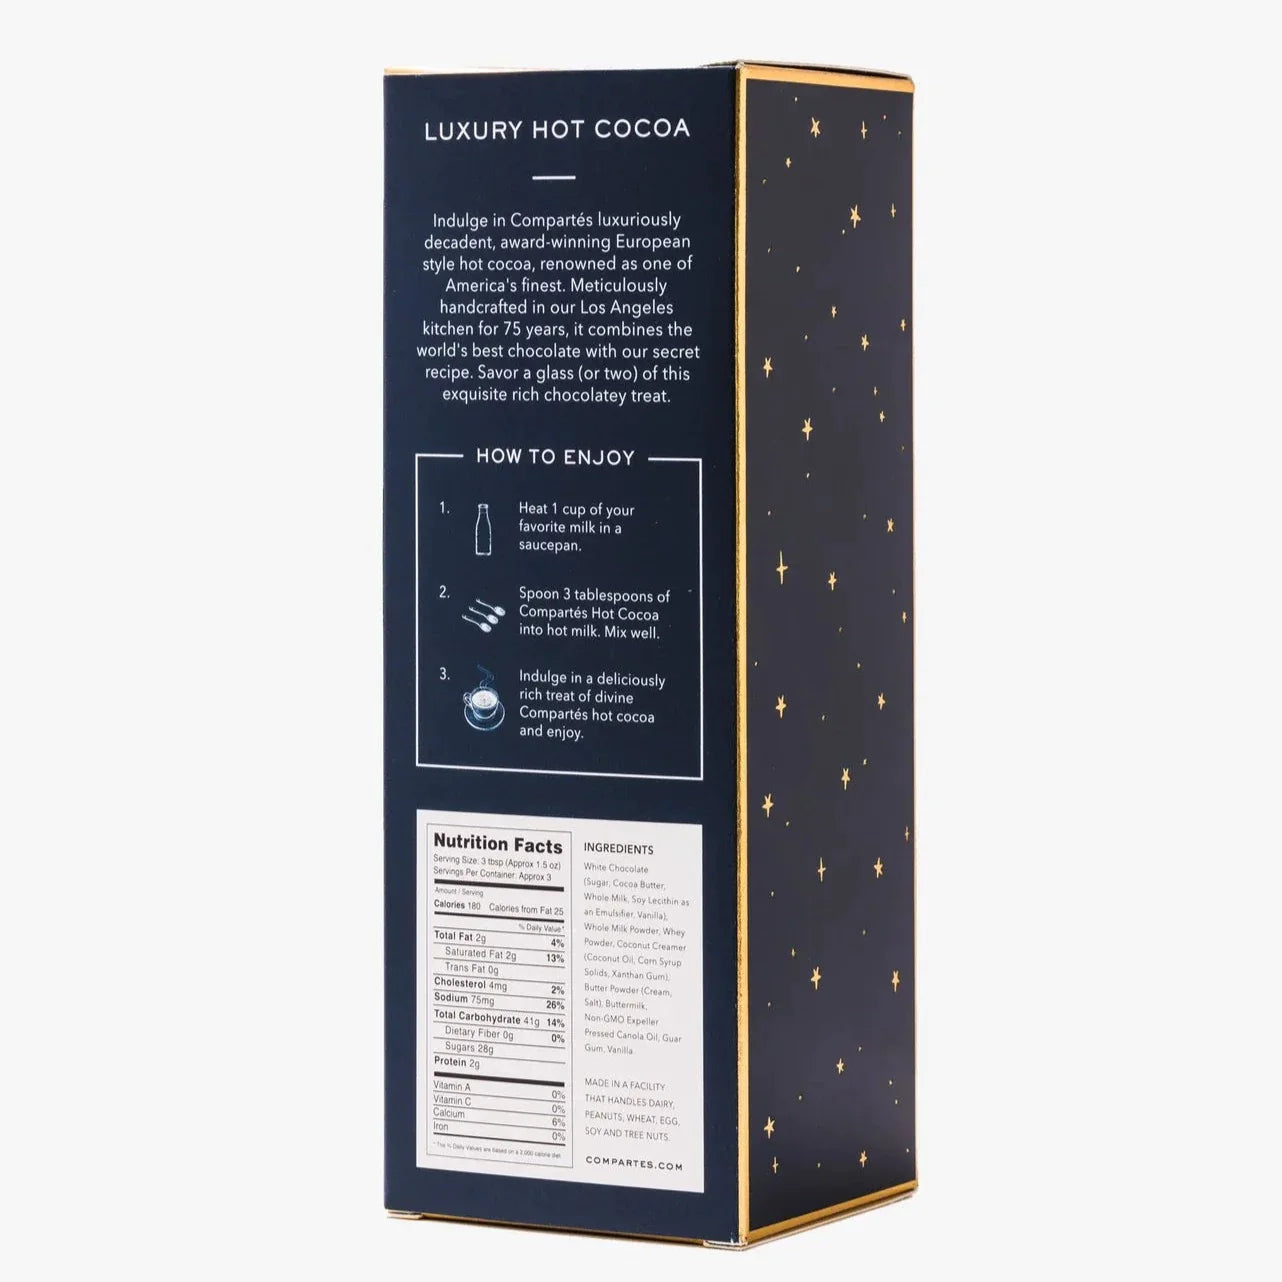 Back view of blue box with description of the product and nutrition facts.